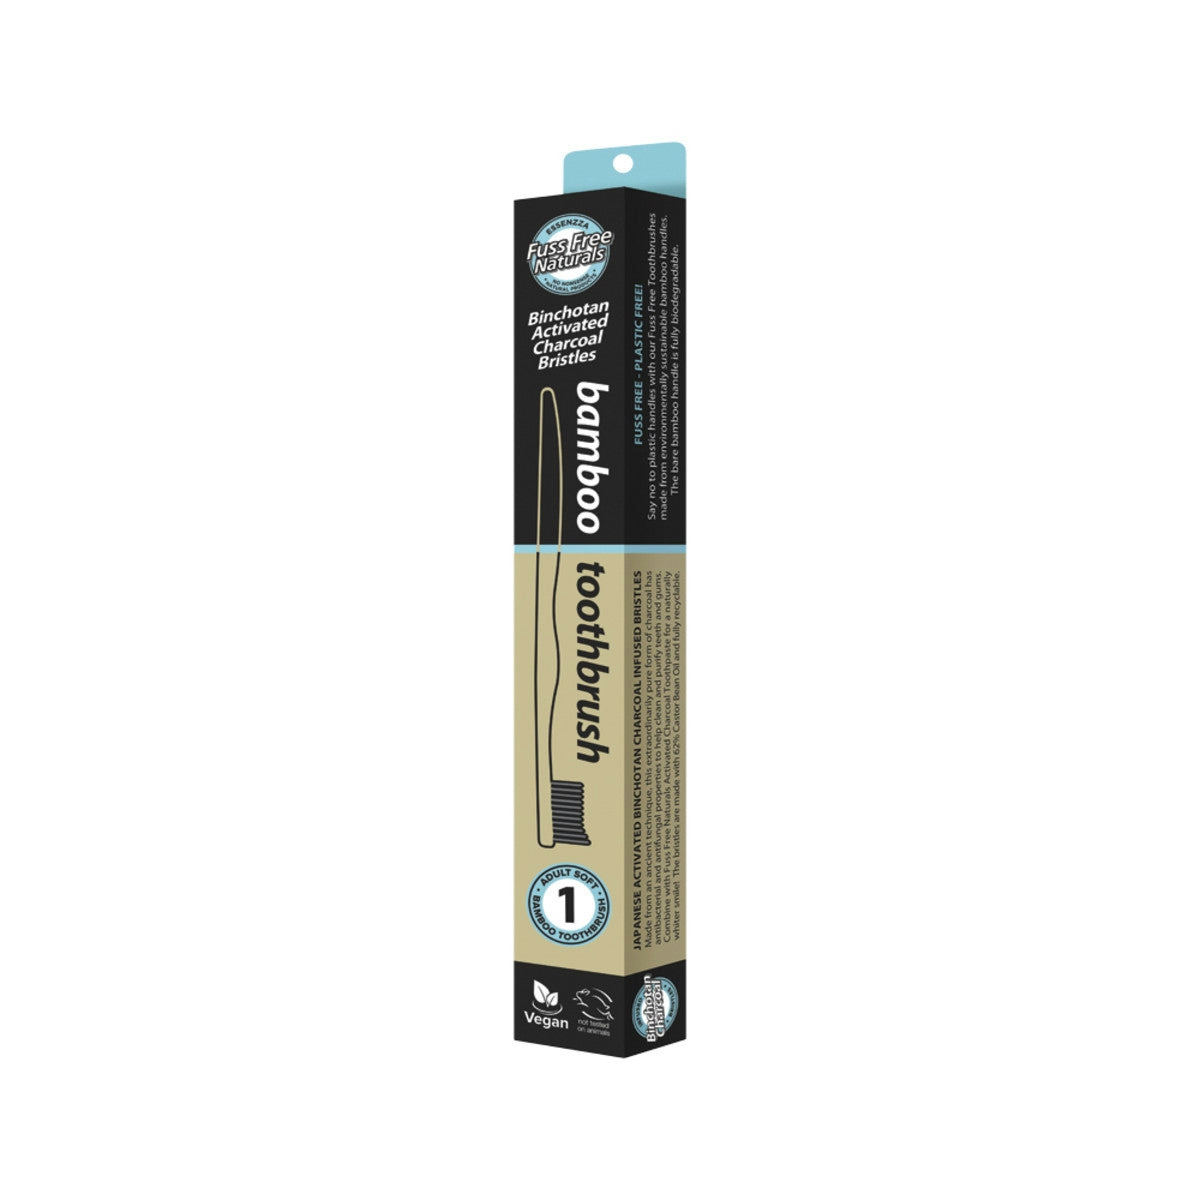 image of Essenzza Fuss Free Naturals Bamboo Toothbrush with Activated Charcoal Bristles Soft 1 Pack on white background